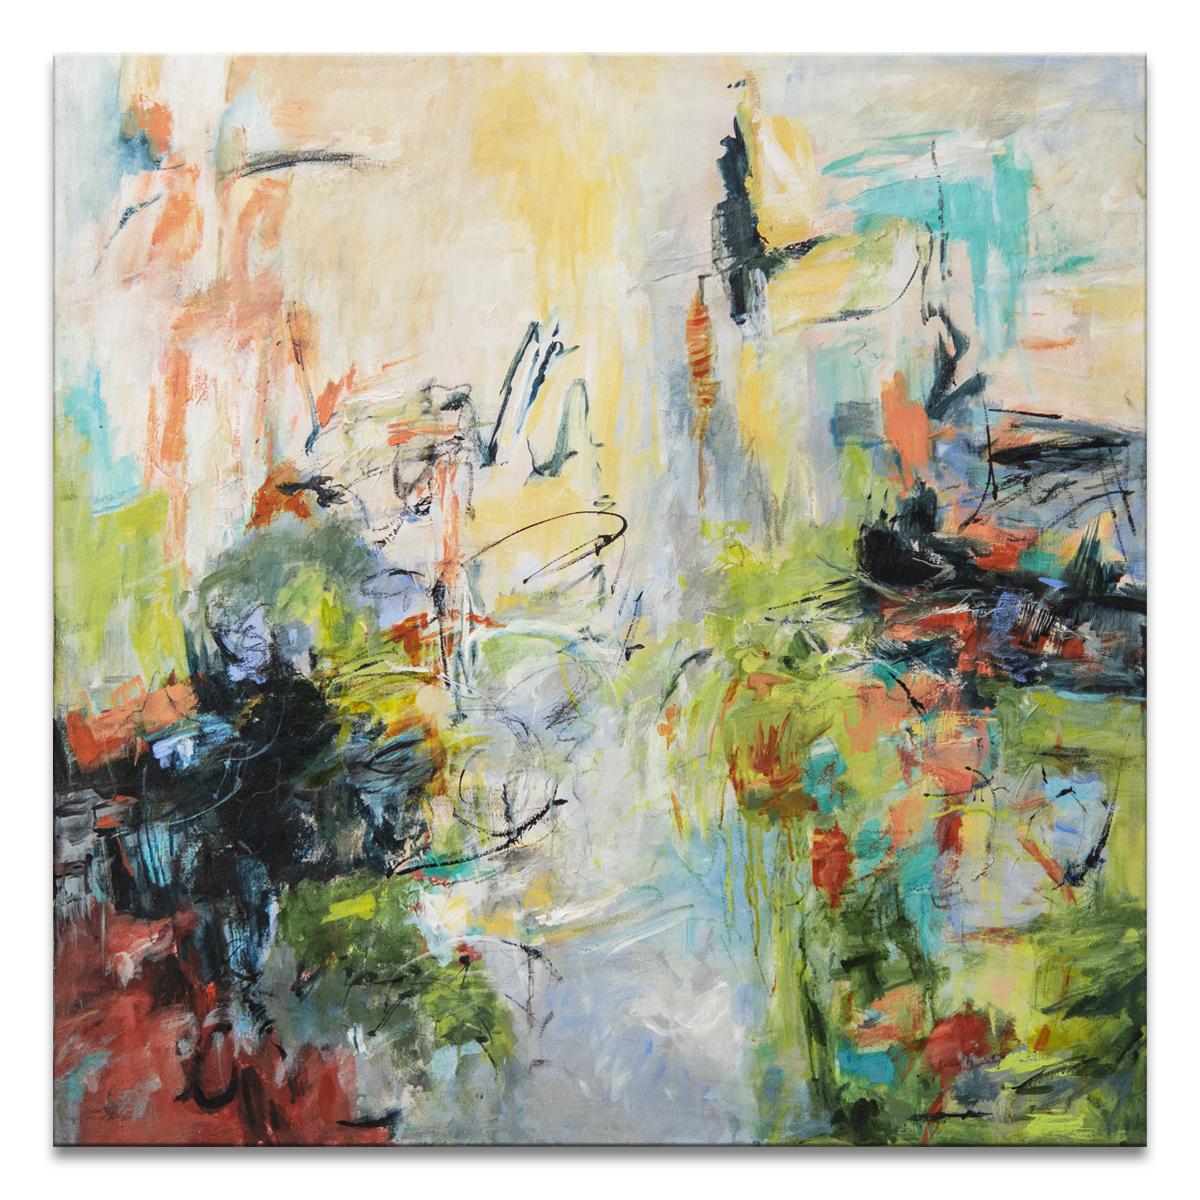 'Summer Fling' Wrapped Canvas Original Painting features an energetic abstract aesthetic in vibrant tones of beige, green, brown, black, soft coral, blue, gray, and soft yellow. Modern divinity expressed on canvas, Karen H. Salup’s work exhibits a